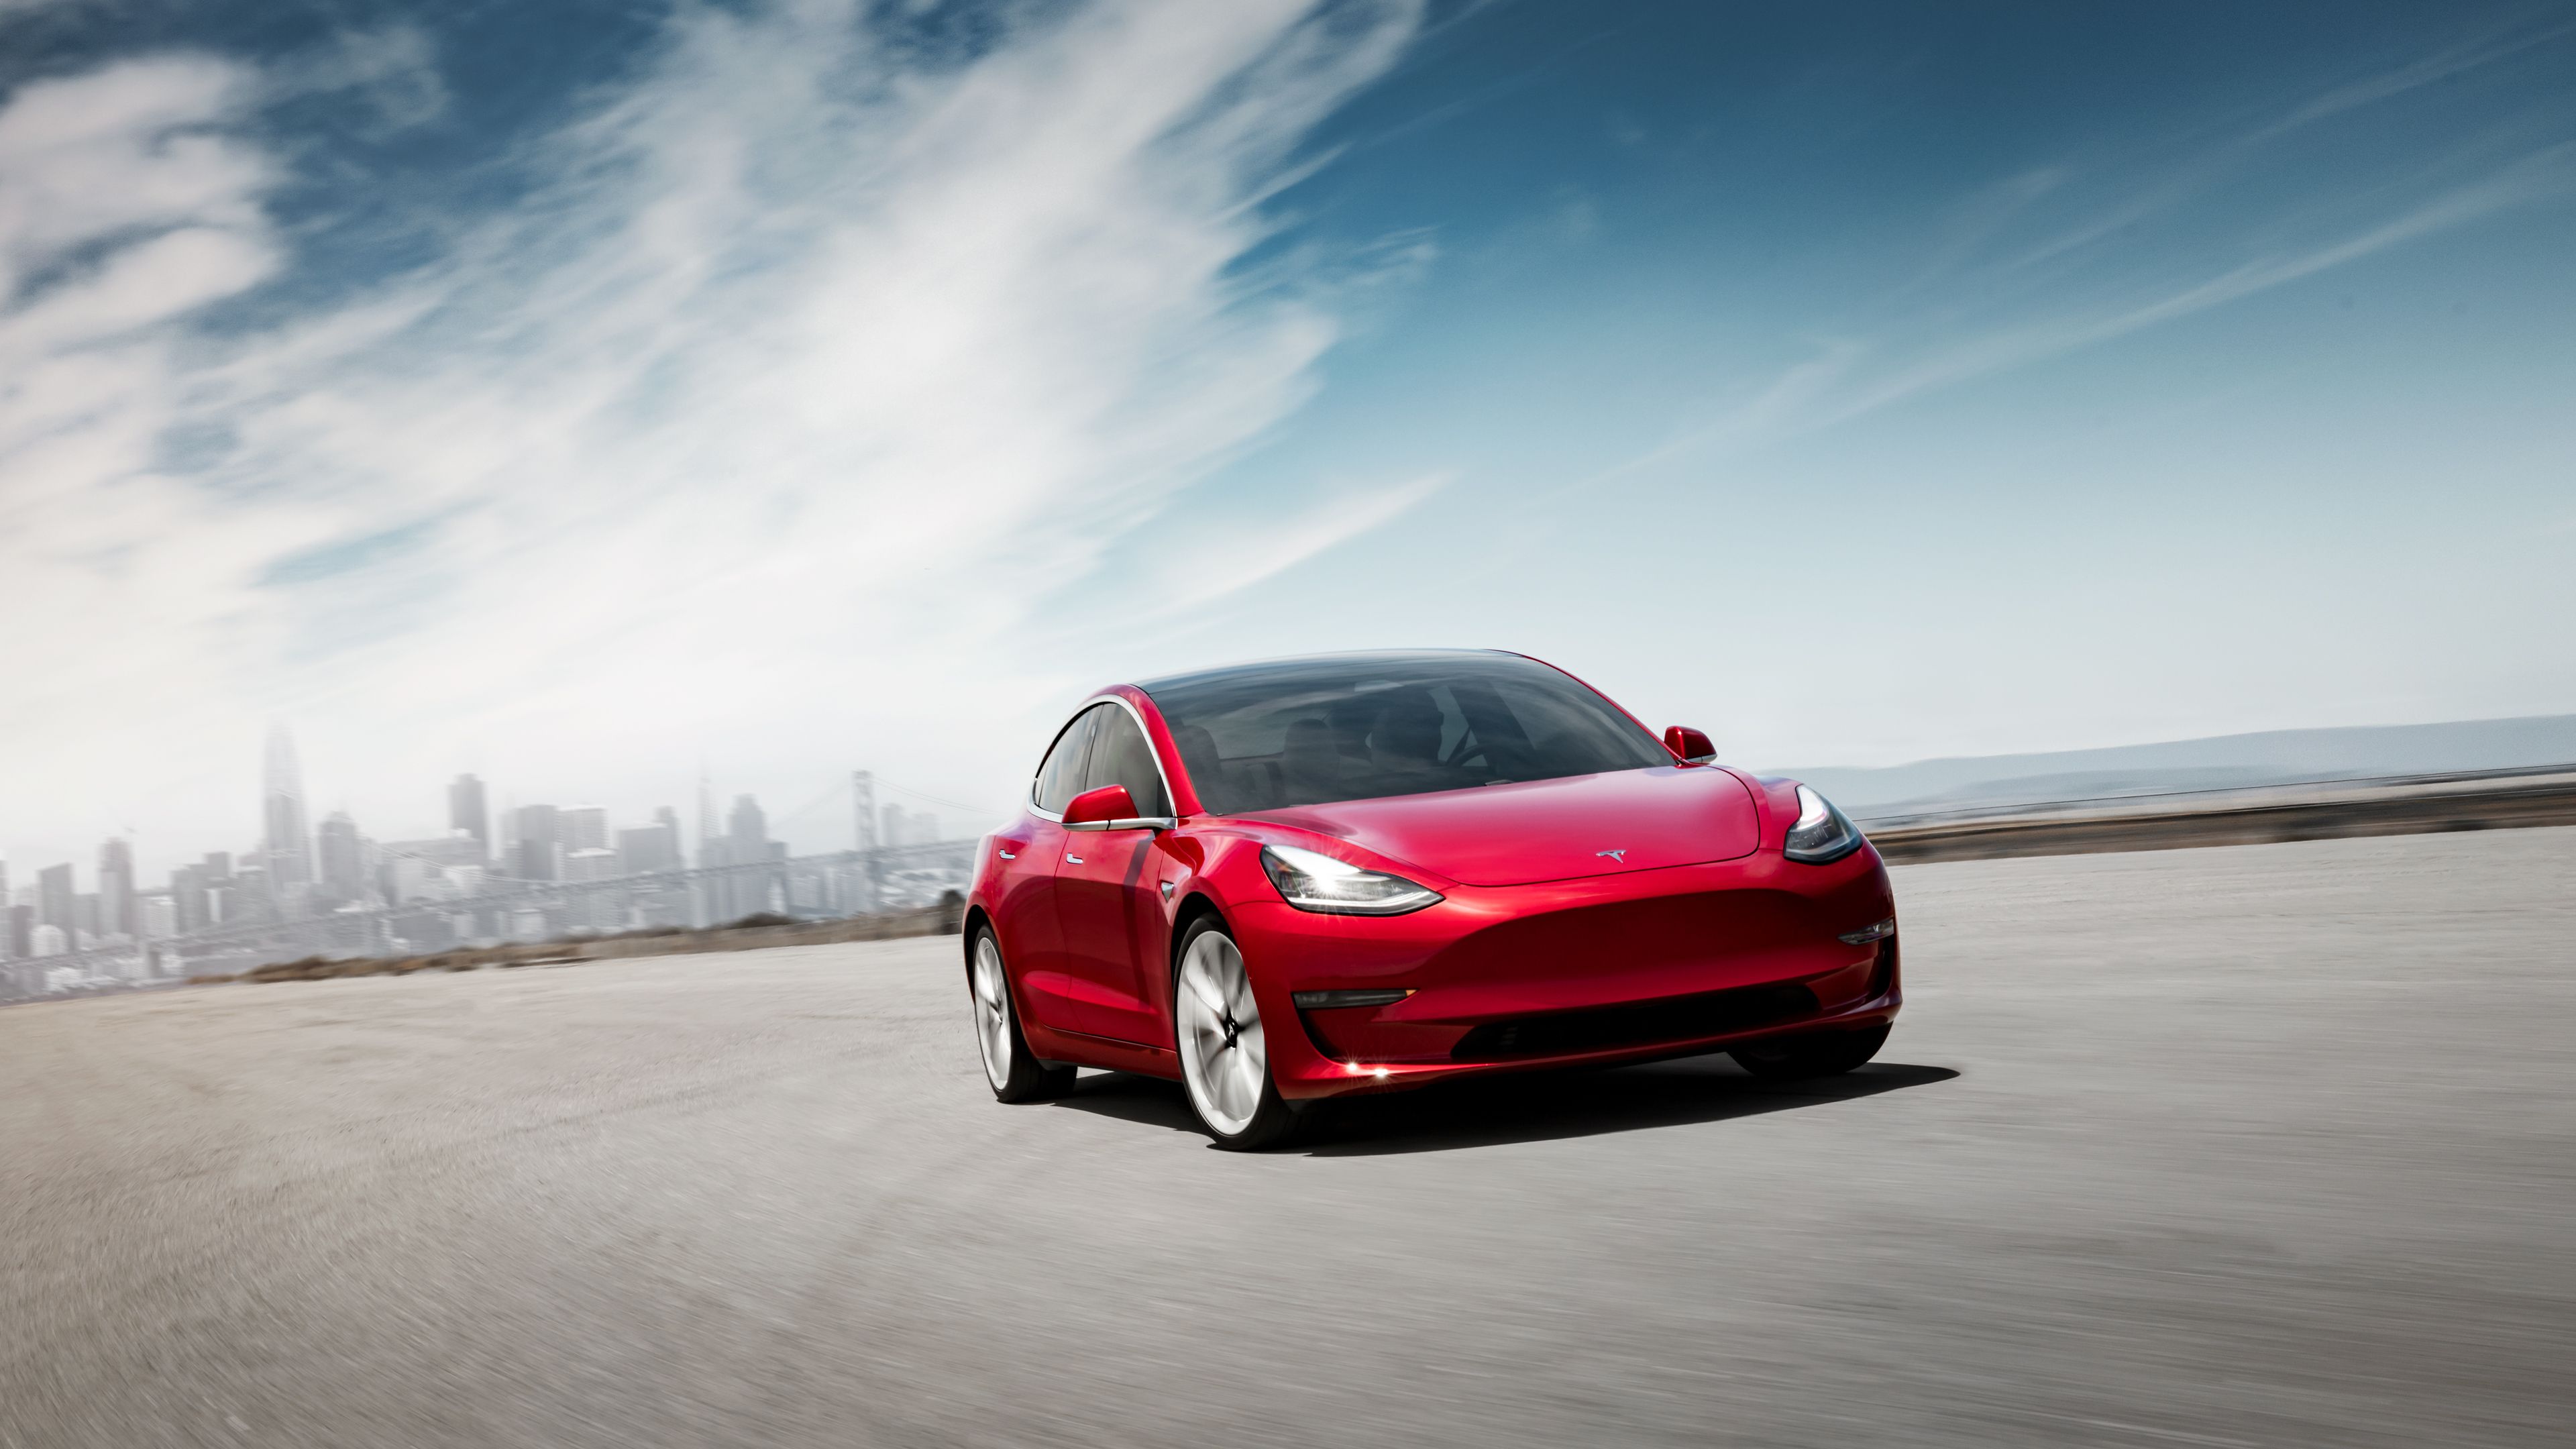 1977 - 1995 Tesla Can't Get the Model 3 Right, but Elon Musk Says a $25,000 EV is Only Three Years Away